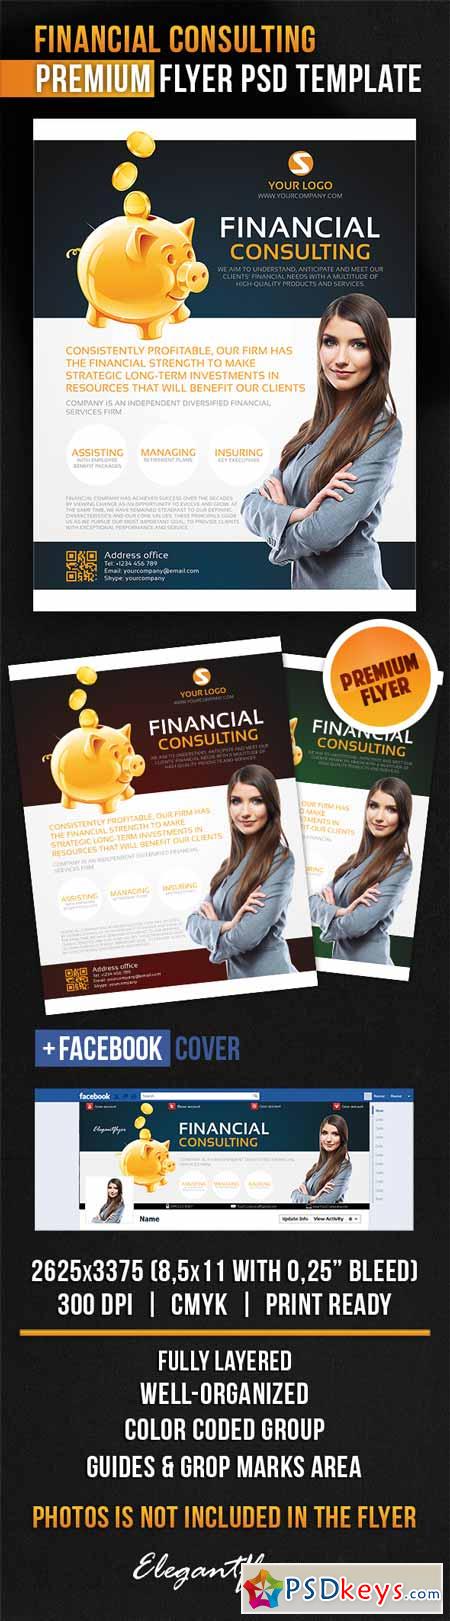 Financial Consulting  Flyer PSD Template + Facebook Cover